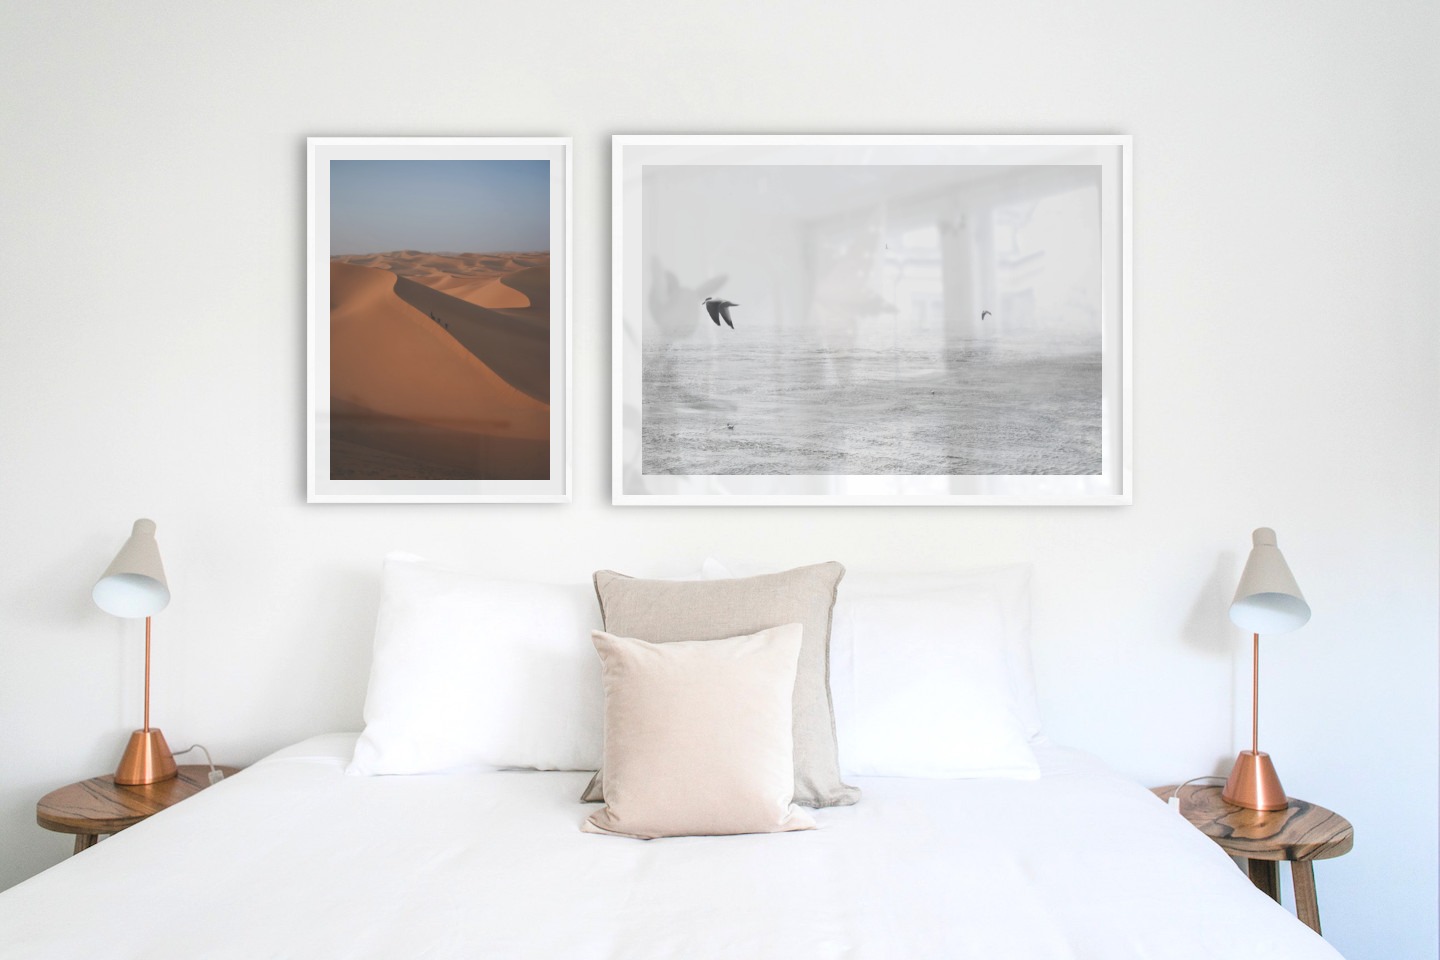 Gallery wall with picture frames in white in sizes 50x70 and 70x100 with prints "Desert" and "Birds over the sea"